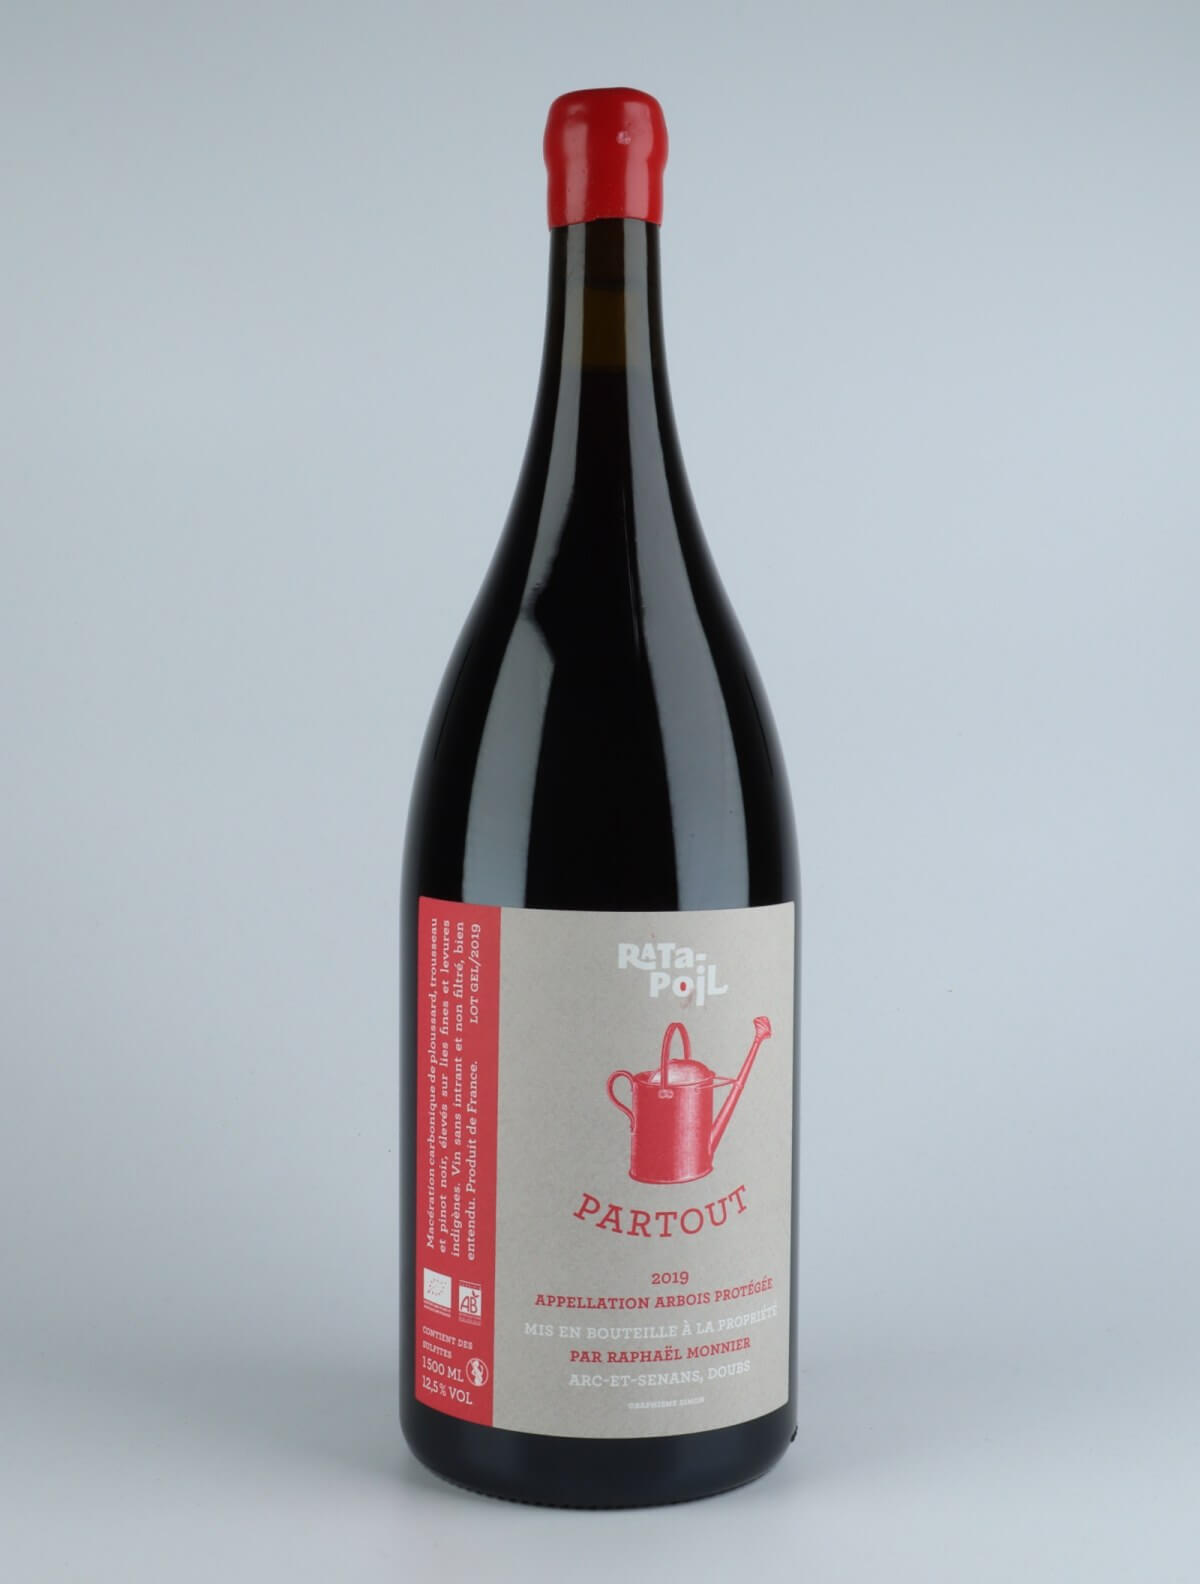 A bottle 2019 Partout Red wine from Domaine Ratapoil, Jura in France